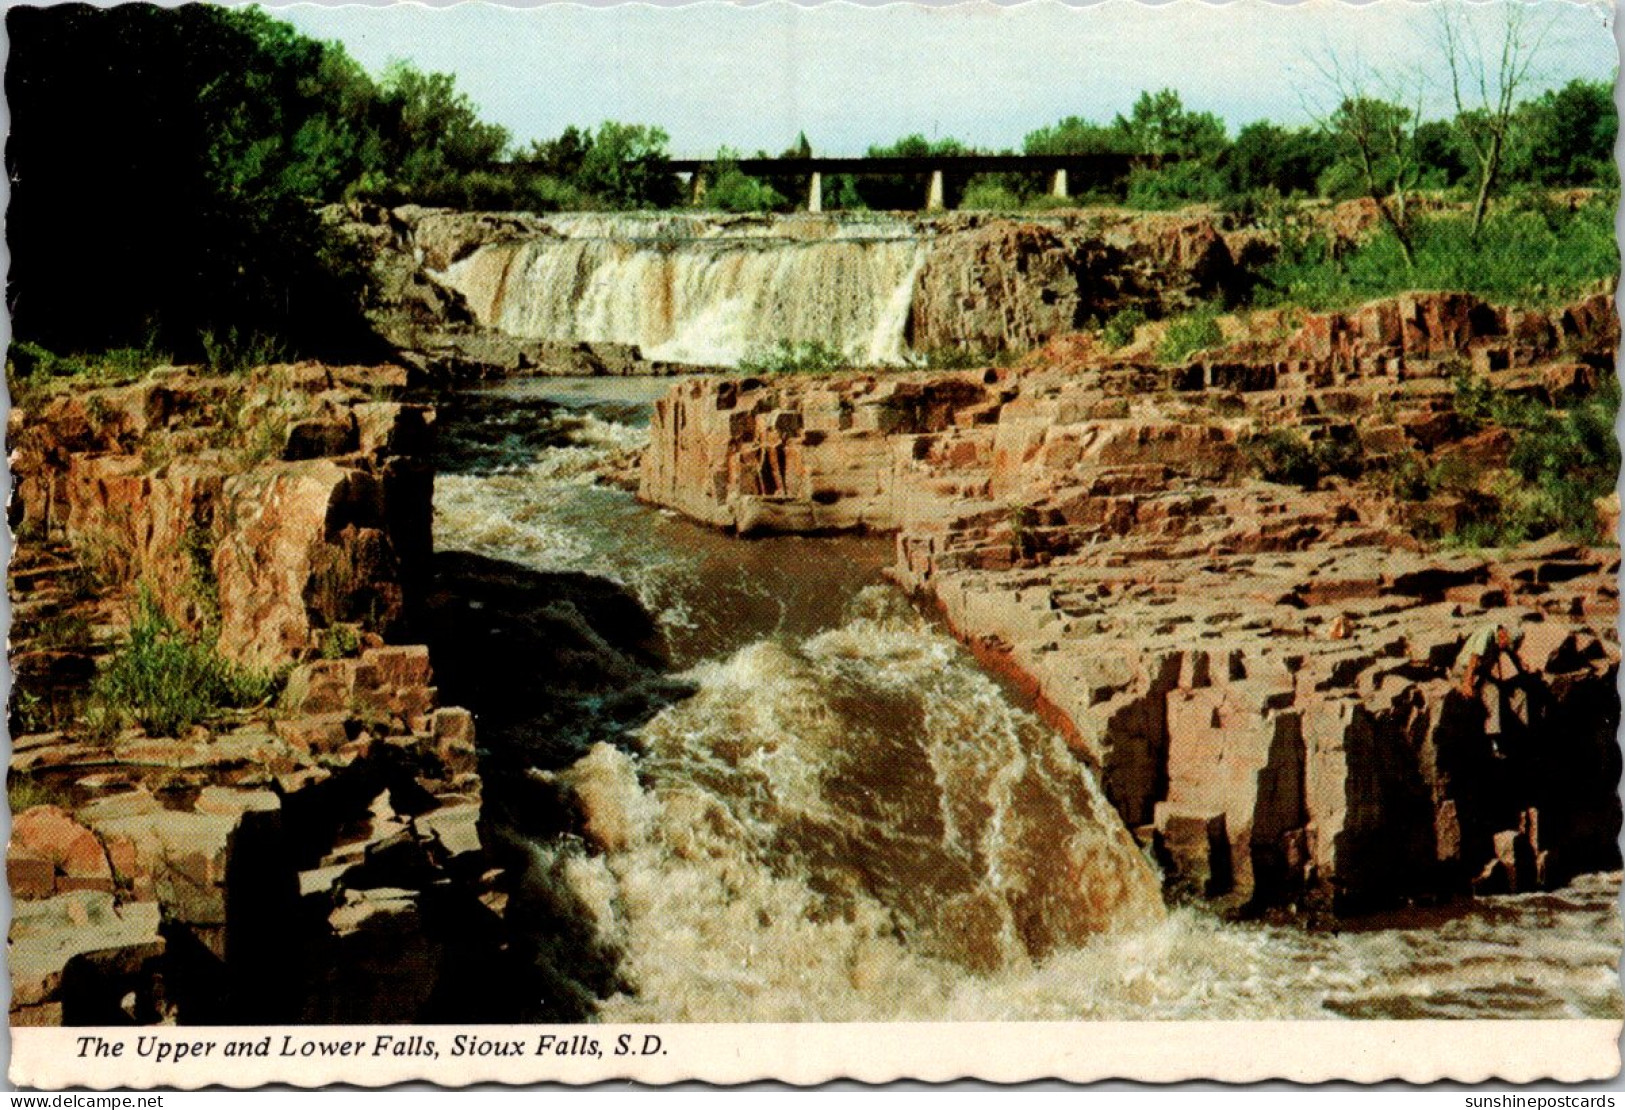 South Dakota Sioux Falls The Upper And Lower Falls On The Big Sioux River - Sioux Falls